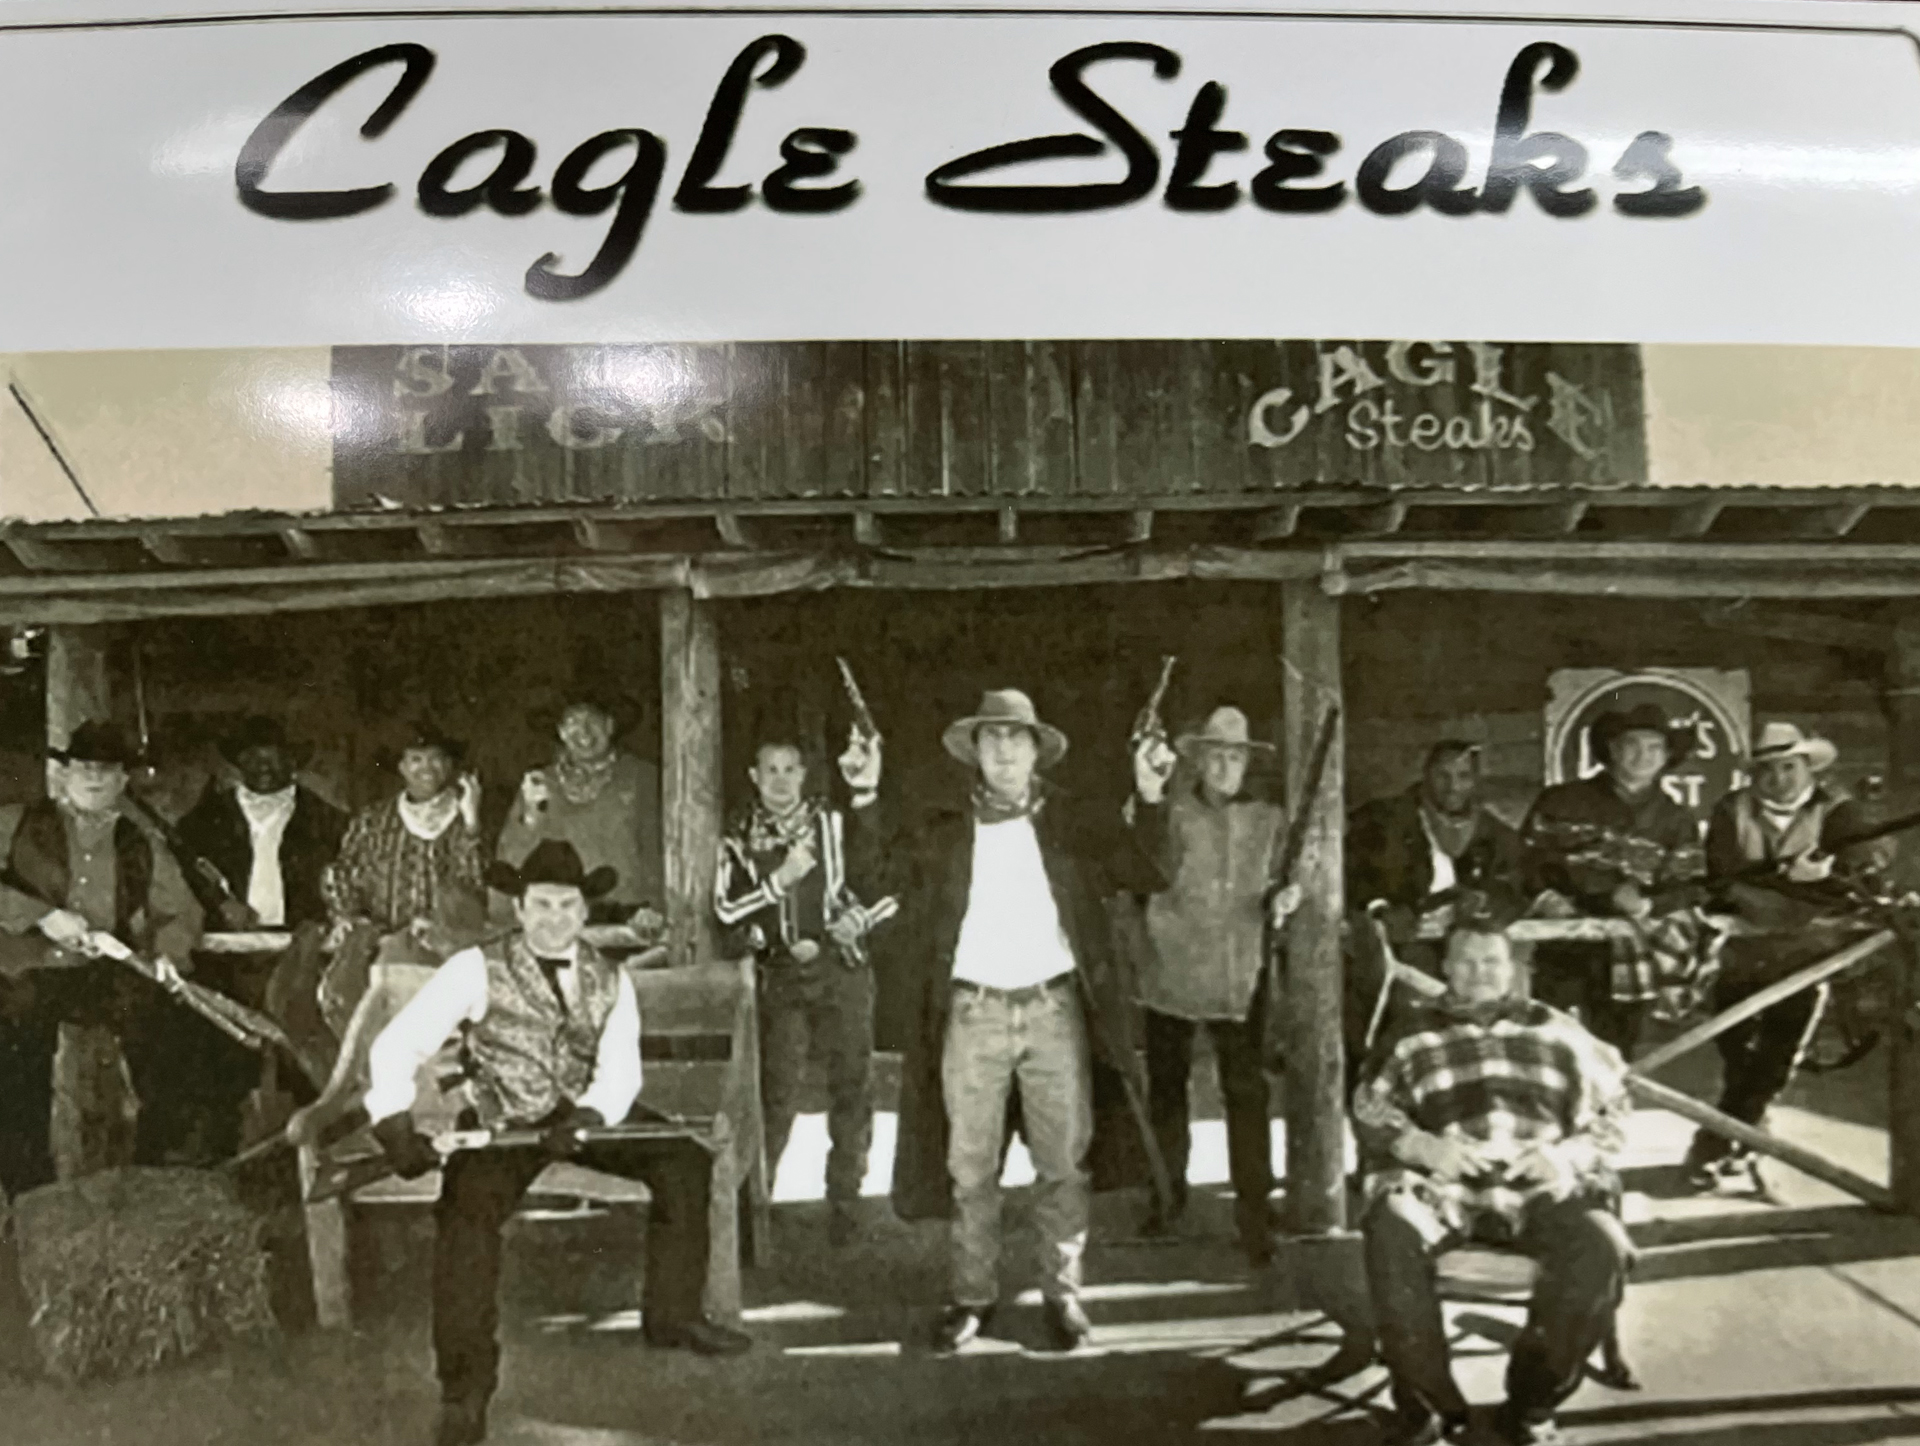 Mike Leach and others appearing in an ad for Cagle Steaks